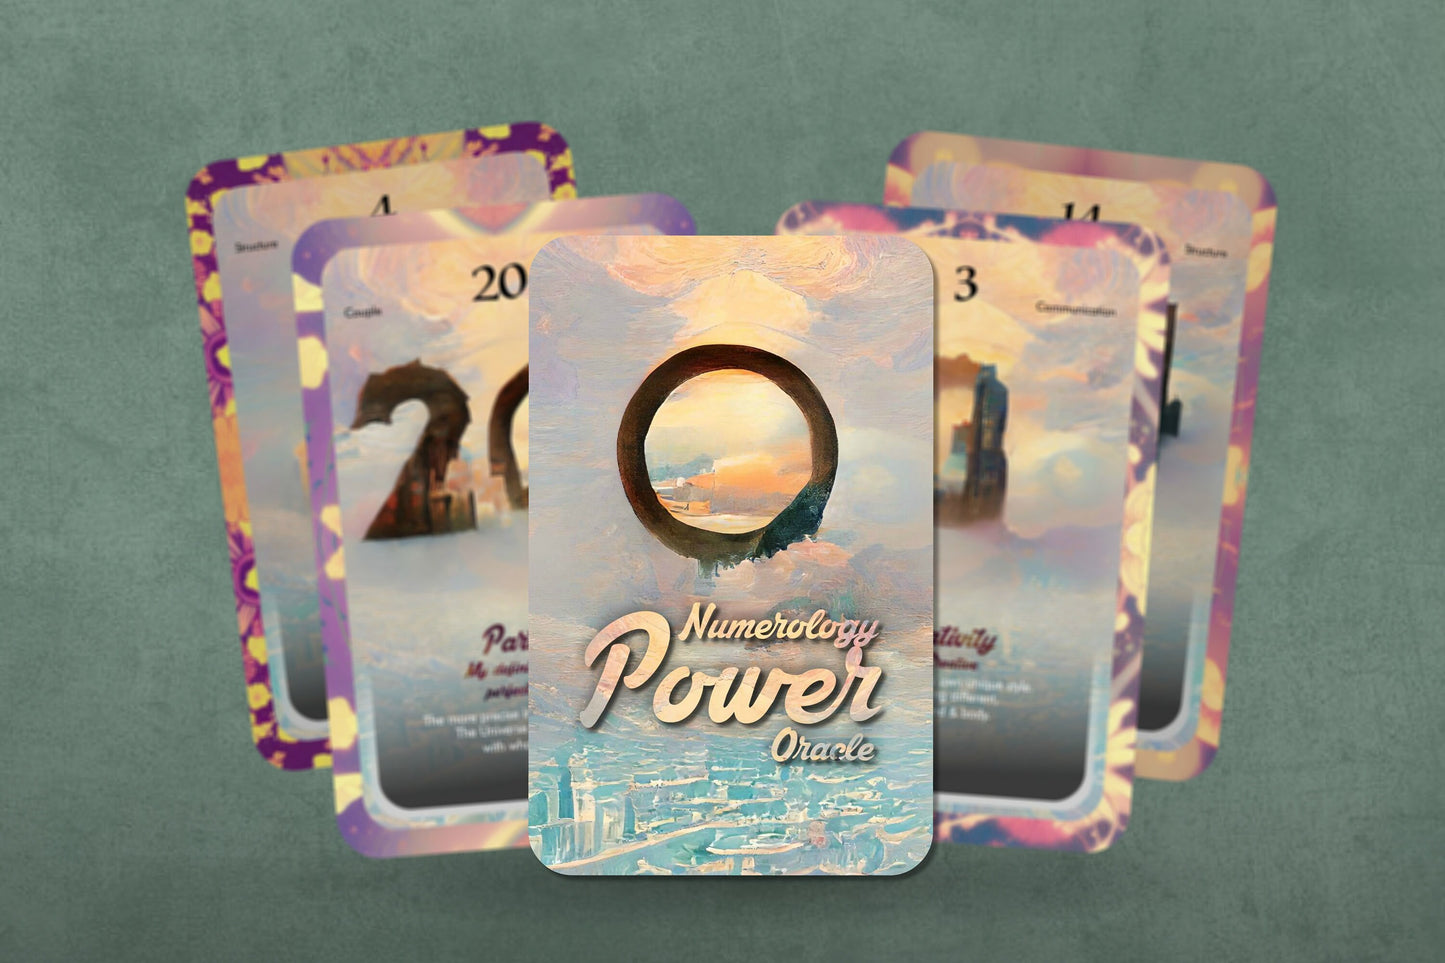 Numerology Power Oracle - Numerology Cards